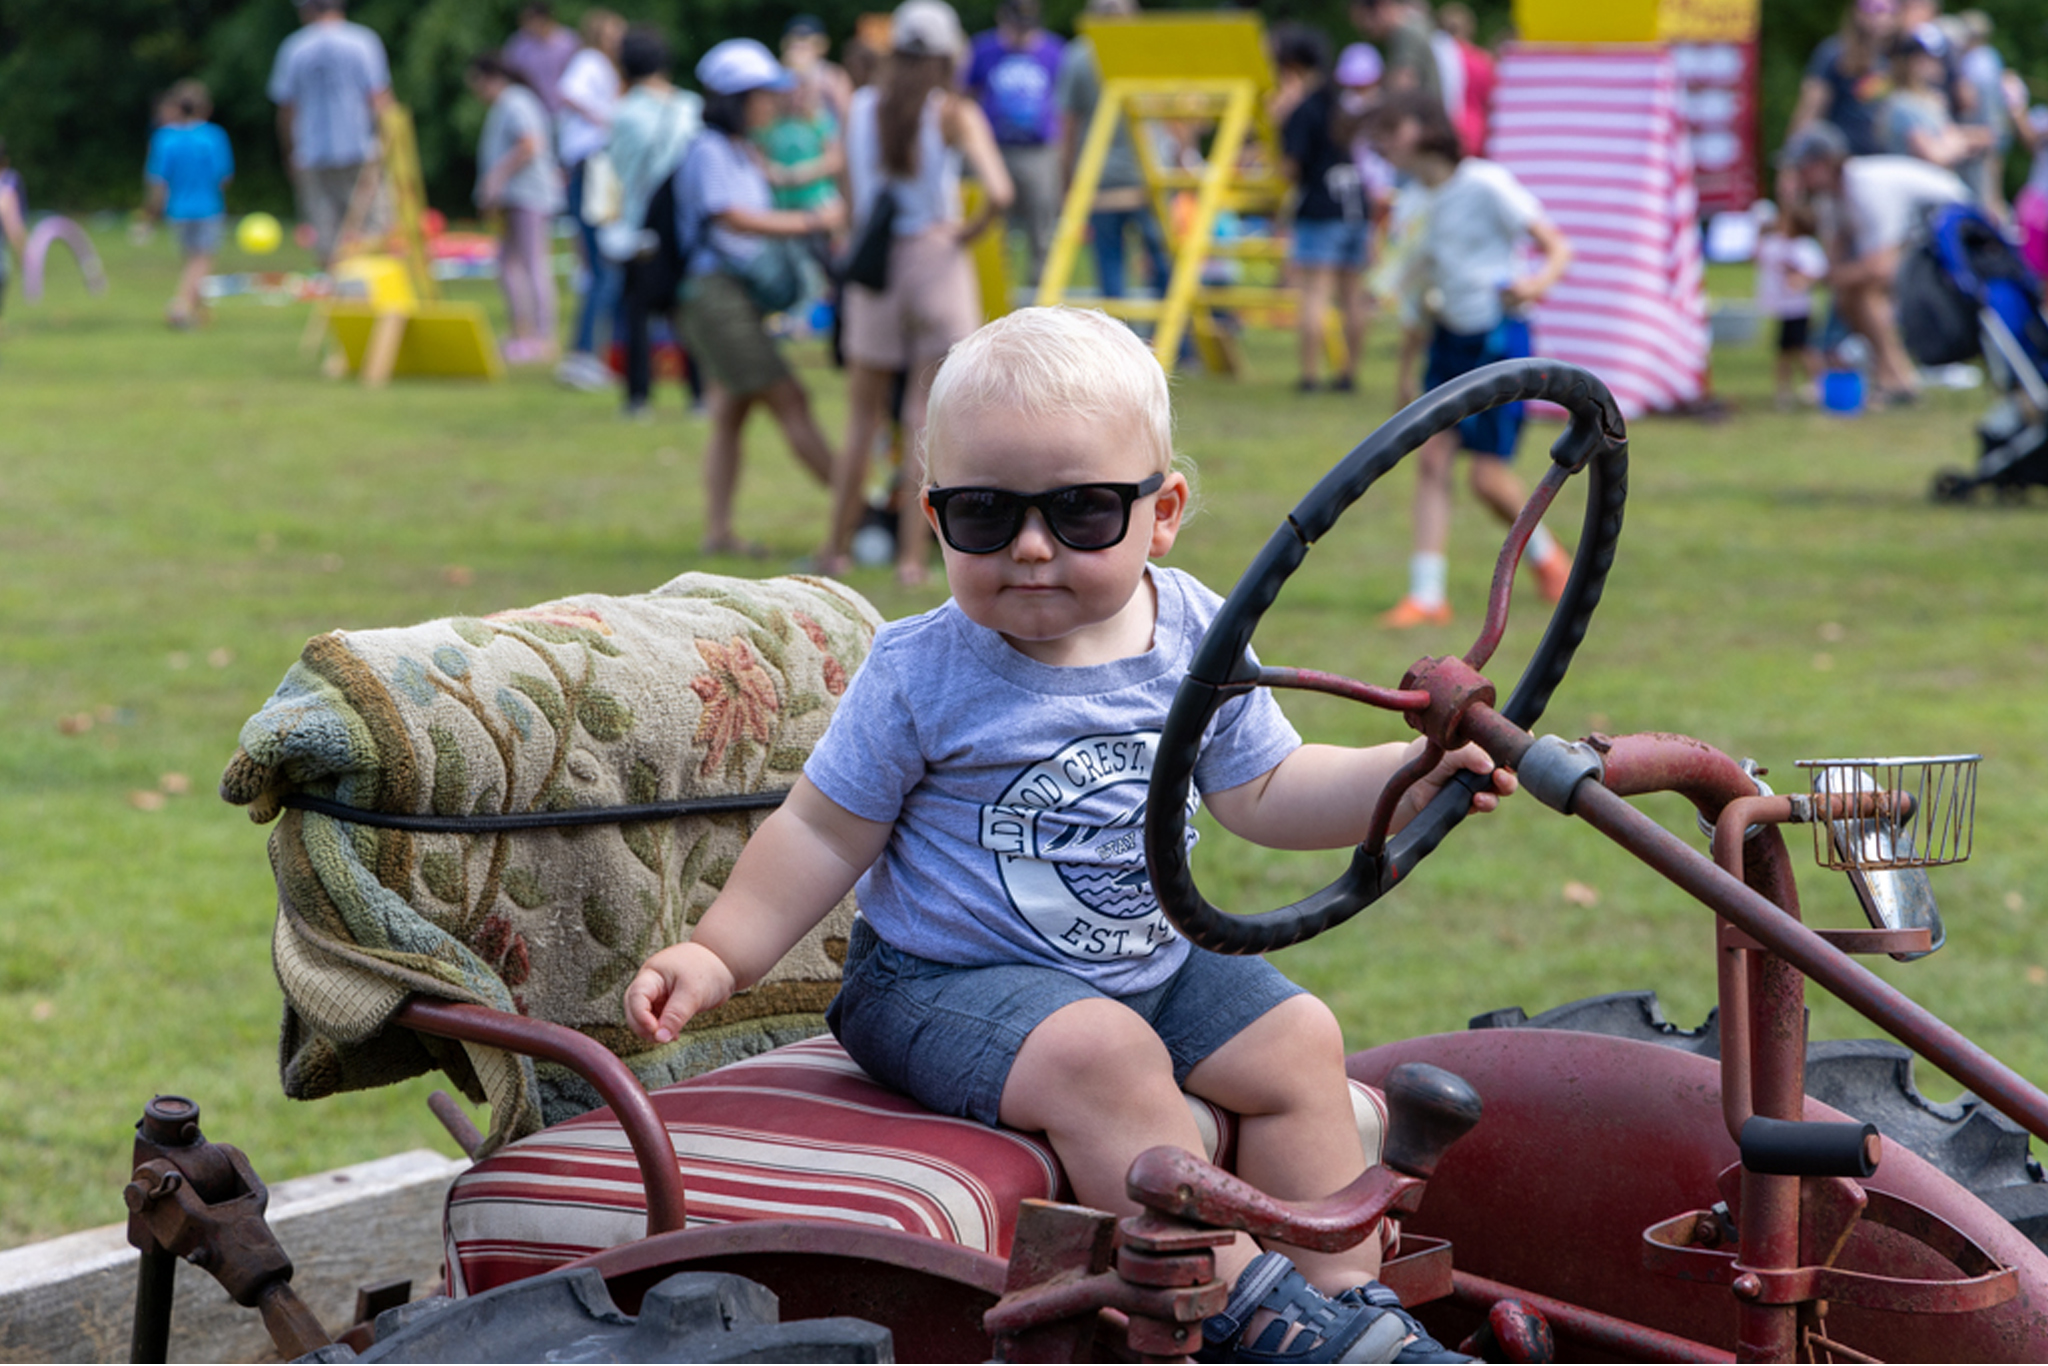 Child on Tractor at Saugerties Farmers Market